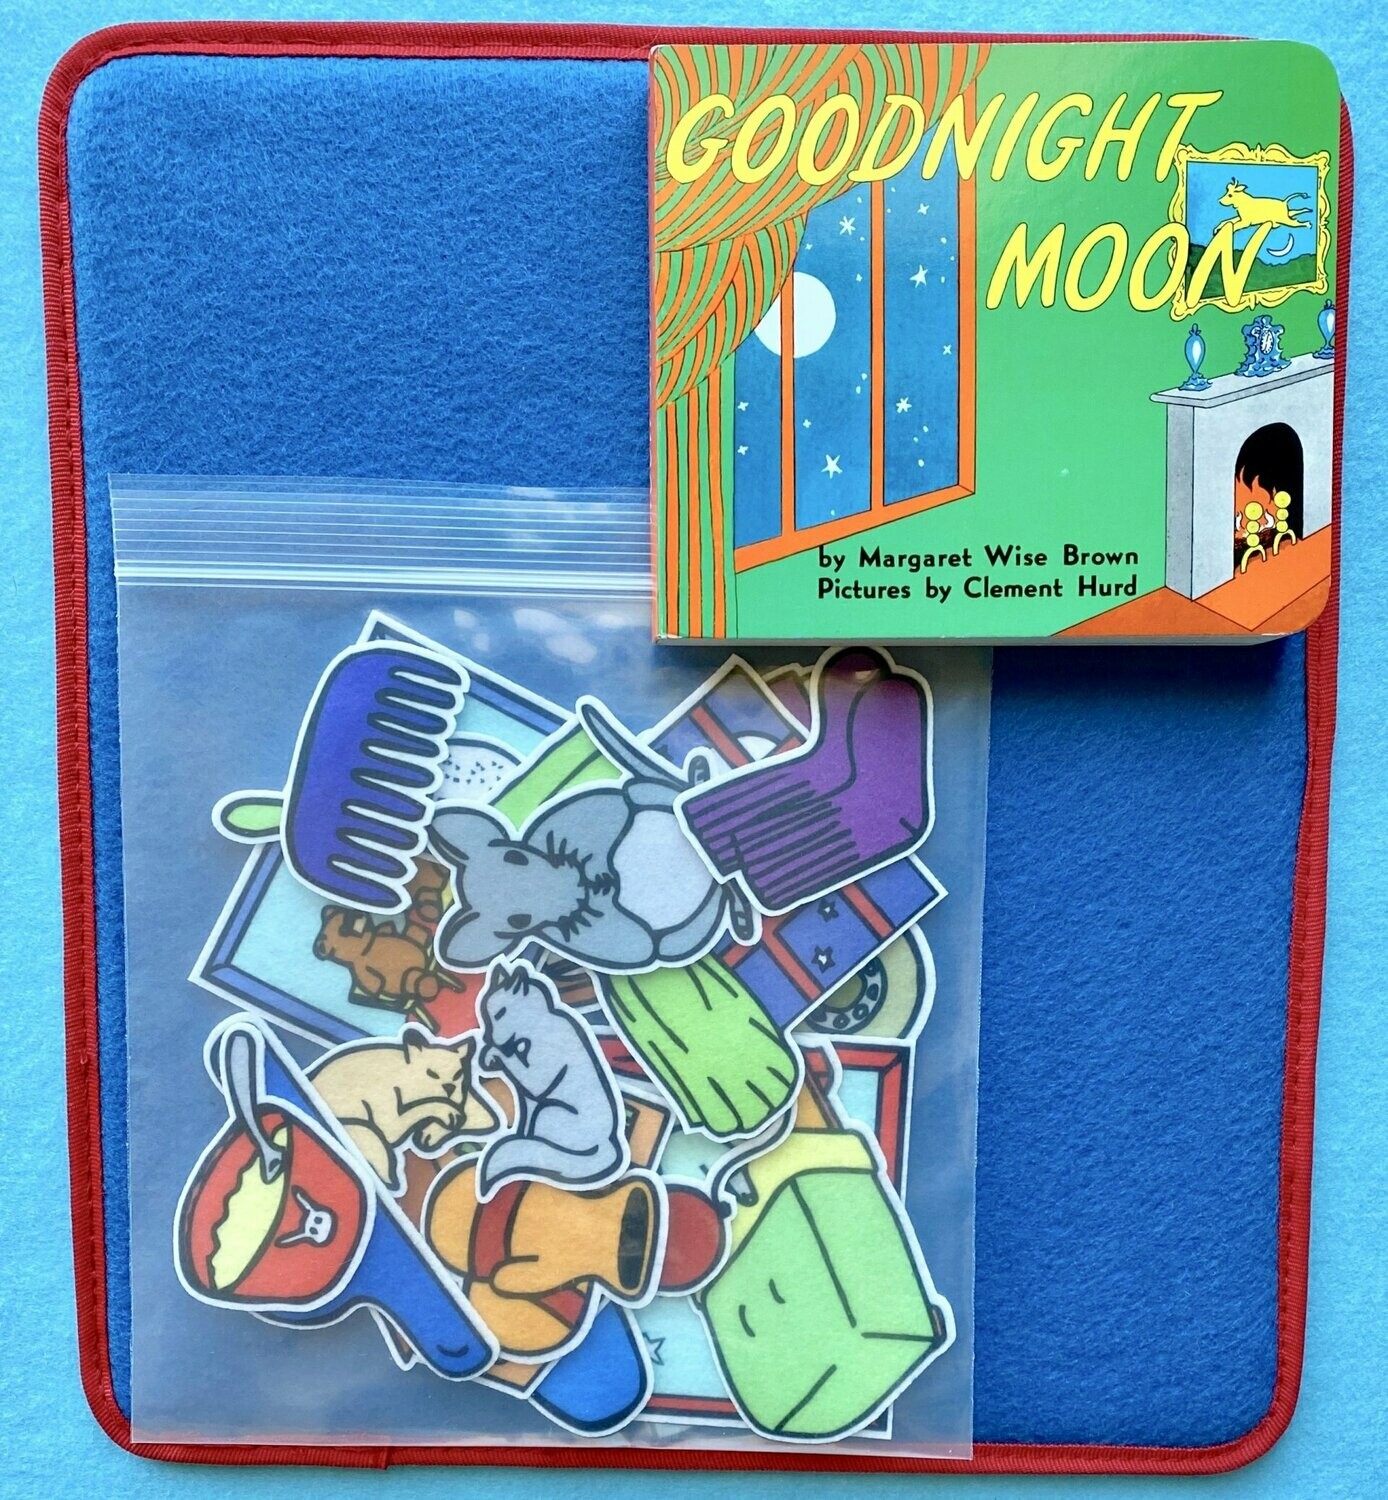 *ALL IN ONE* STORY PACK- Goodnight Moon